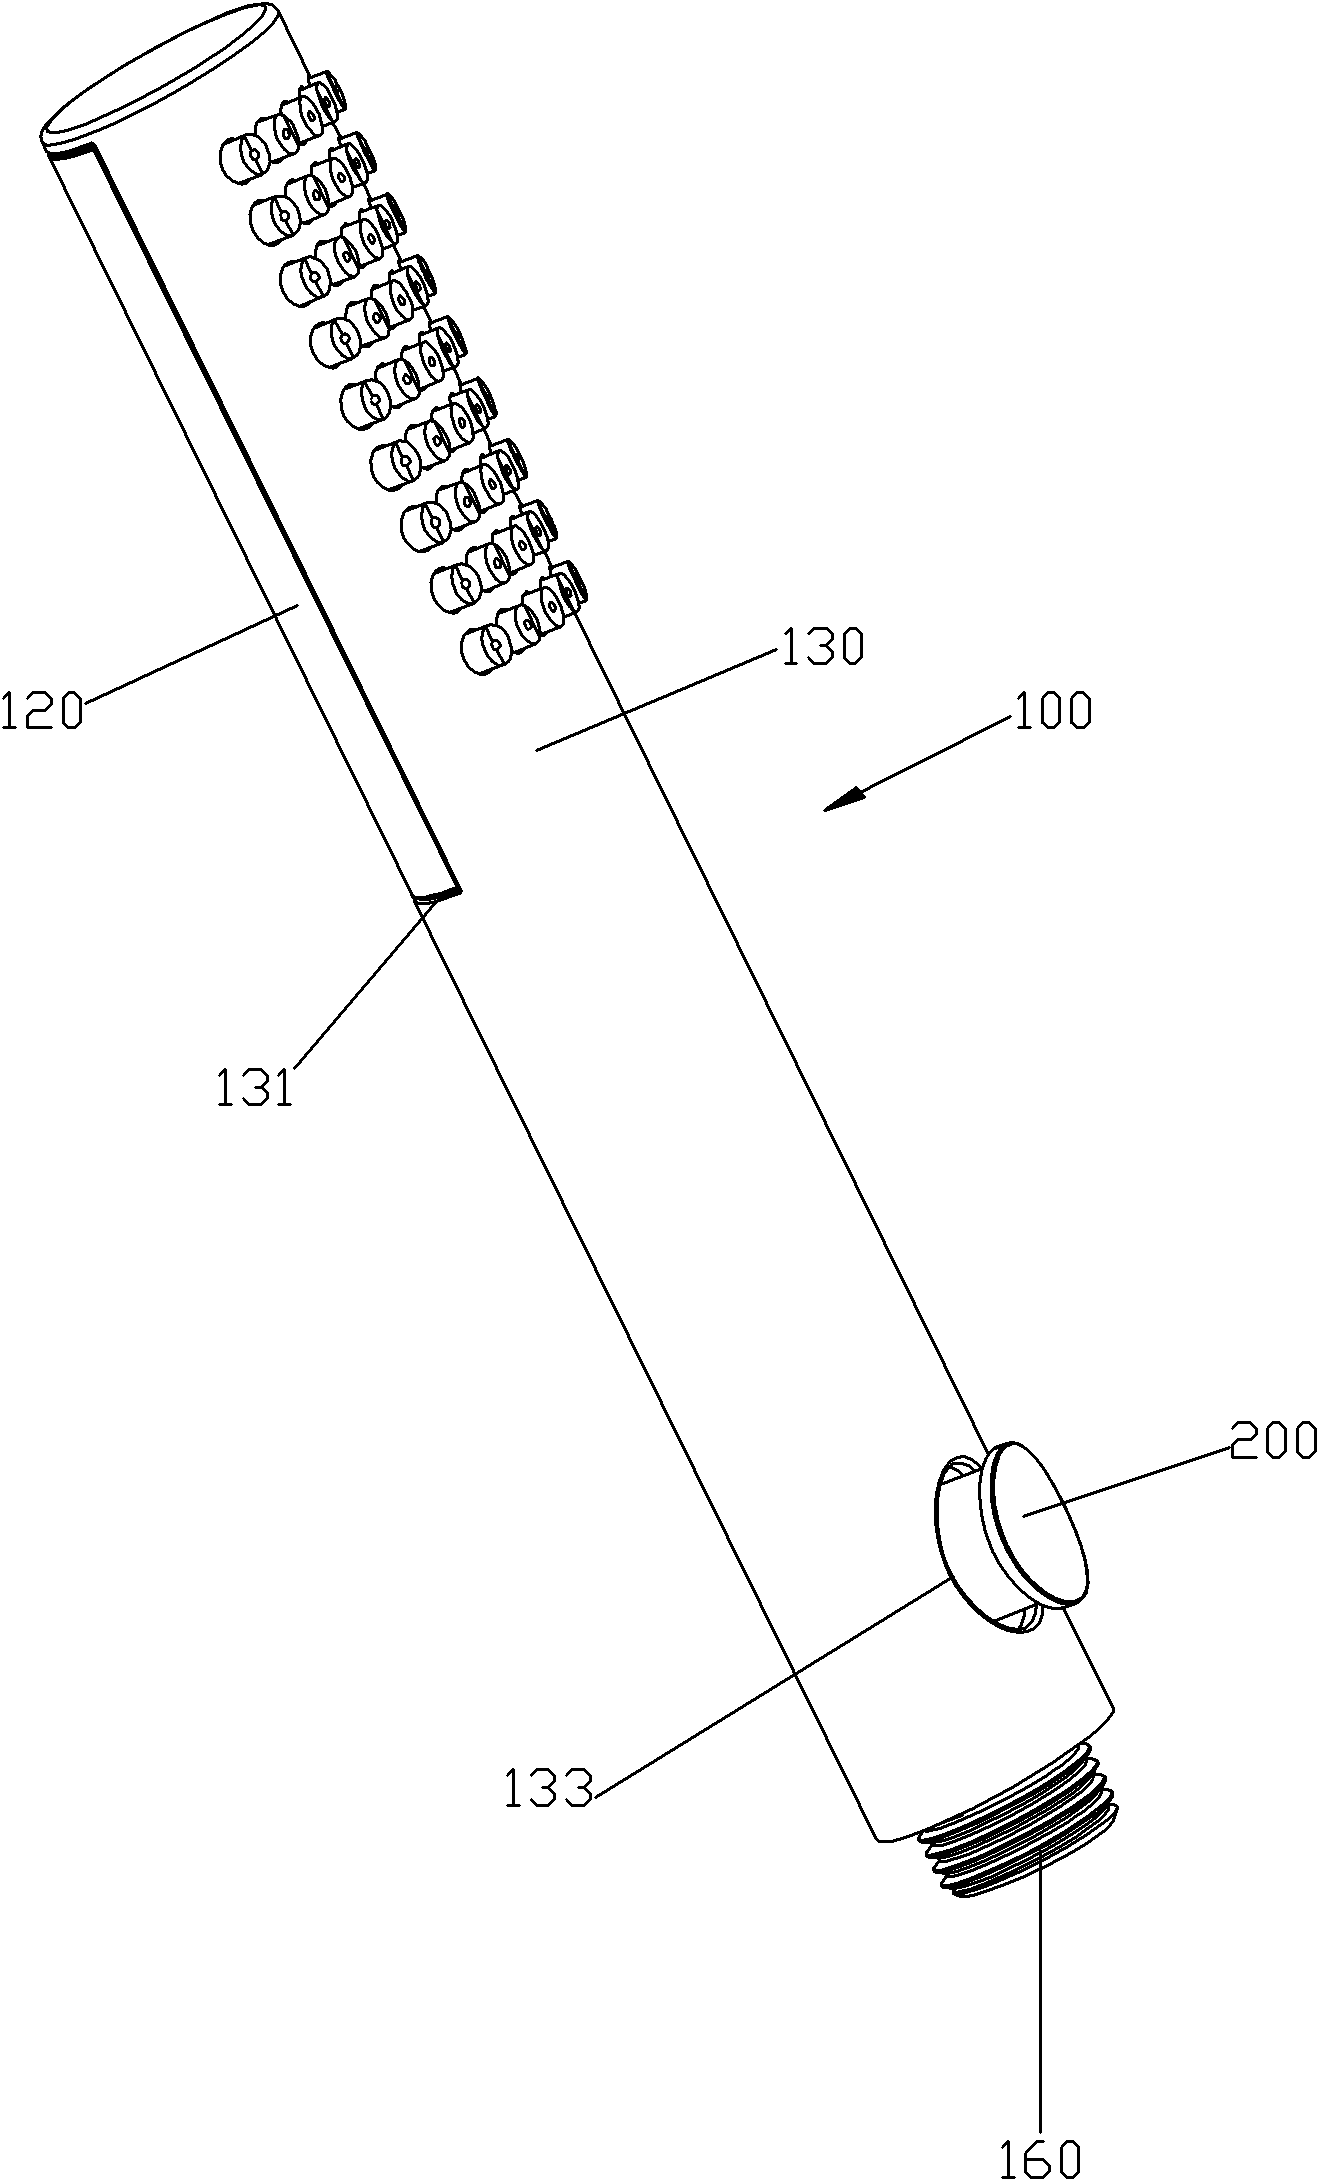 Button flow regulating device